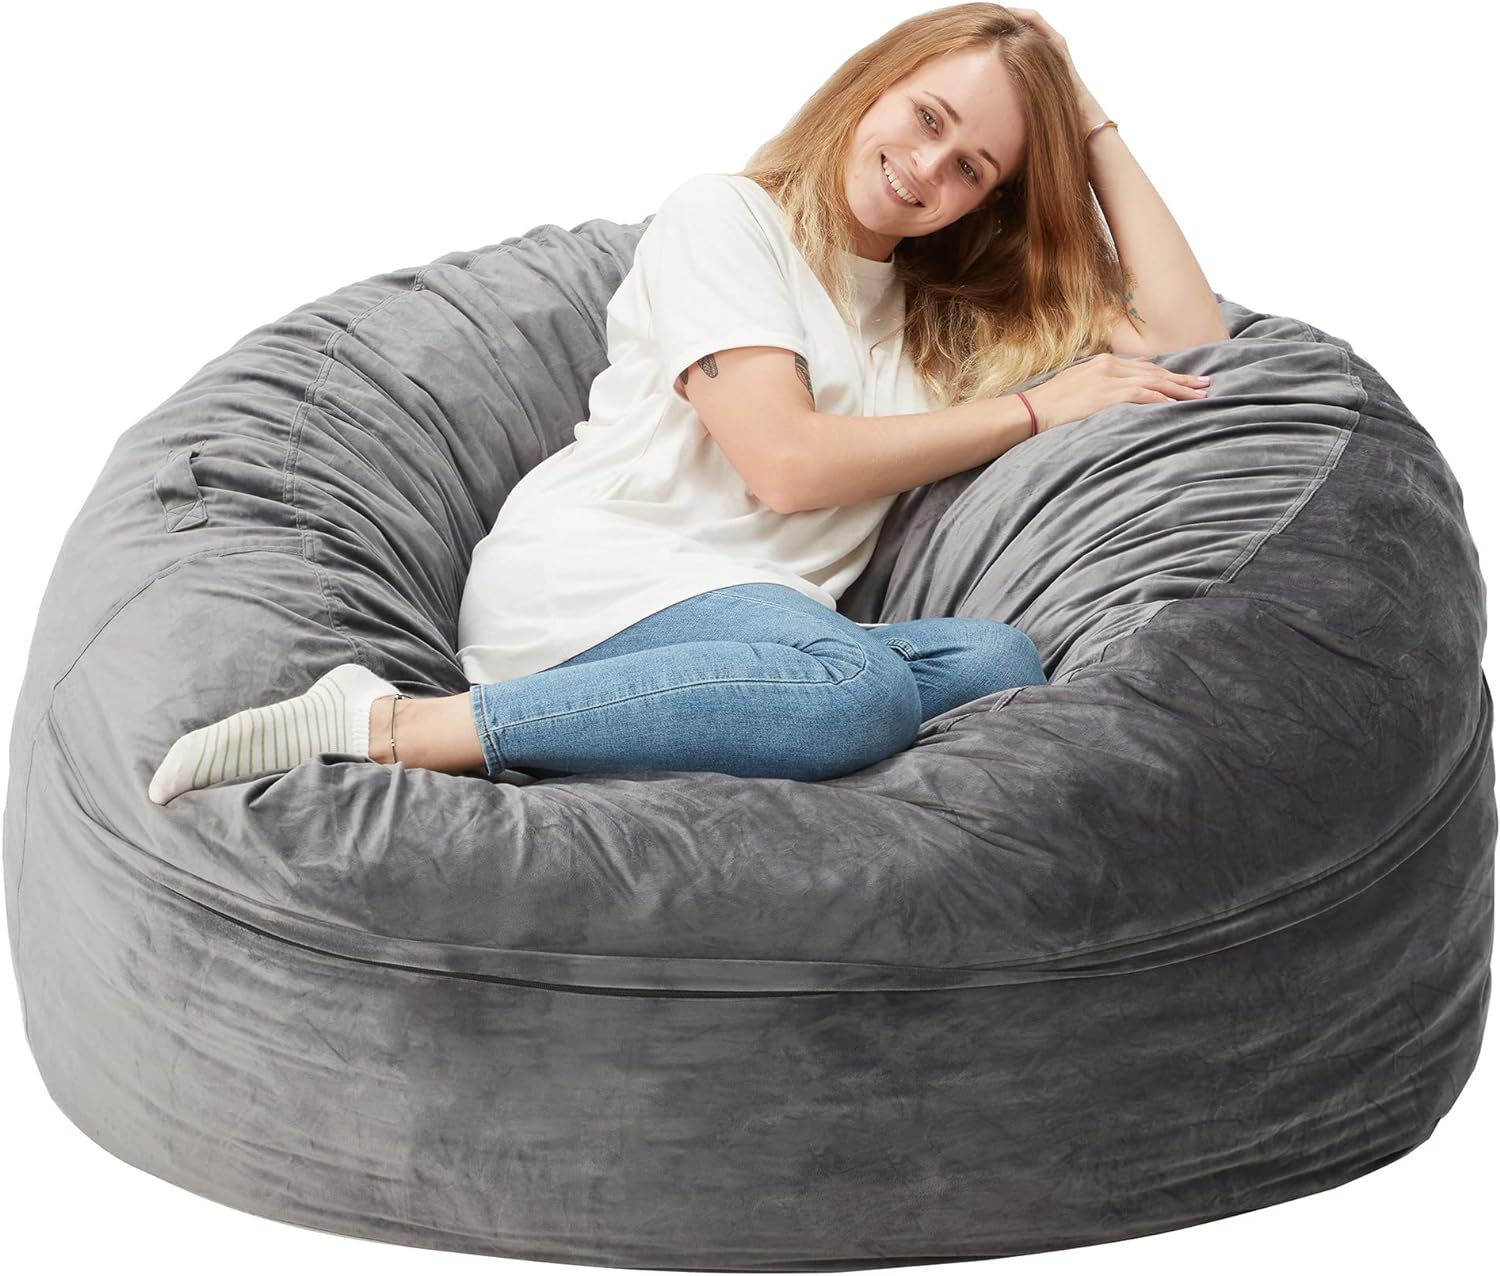 Homguava Bean Bag Chair: Large 5' Bean Bags with Memory Foam Filled, Large Beanbag Chairs Soft Sofa with Dutch Velet Cover-56×56"×36" (Grey)